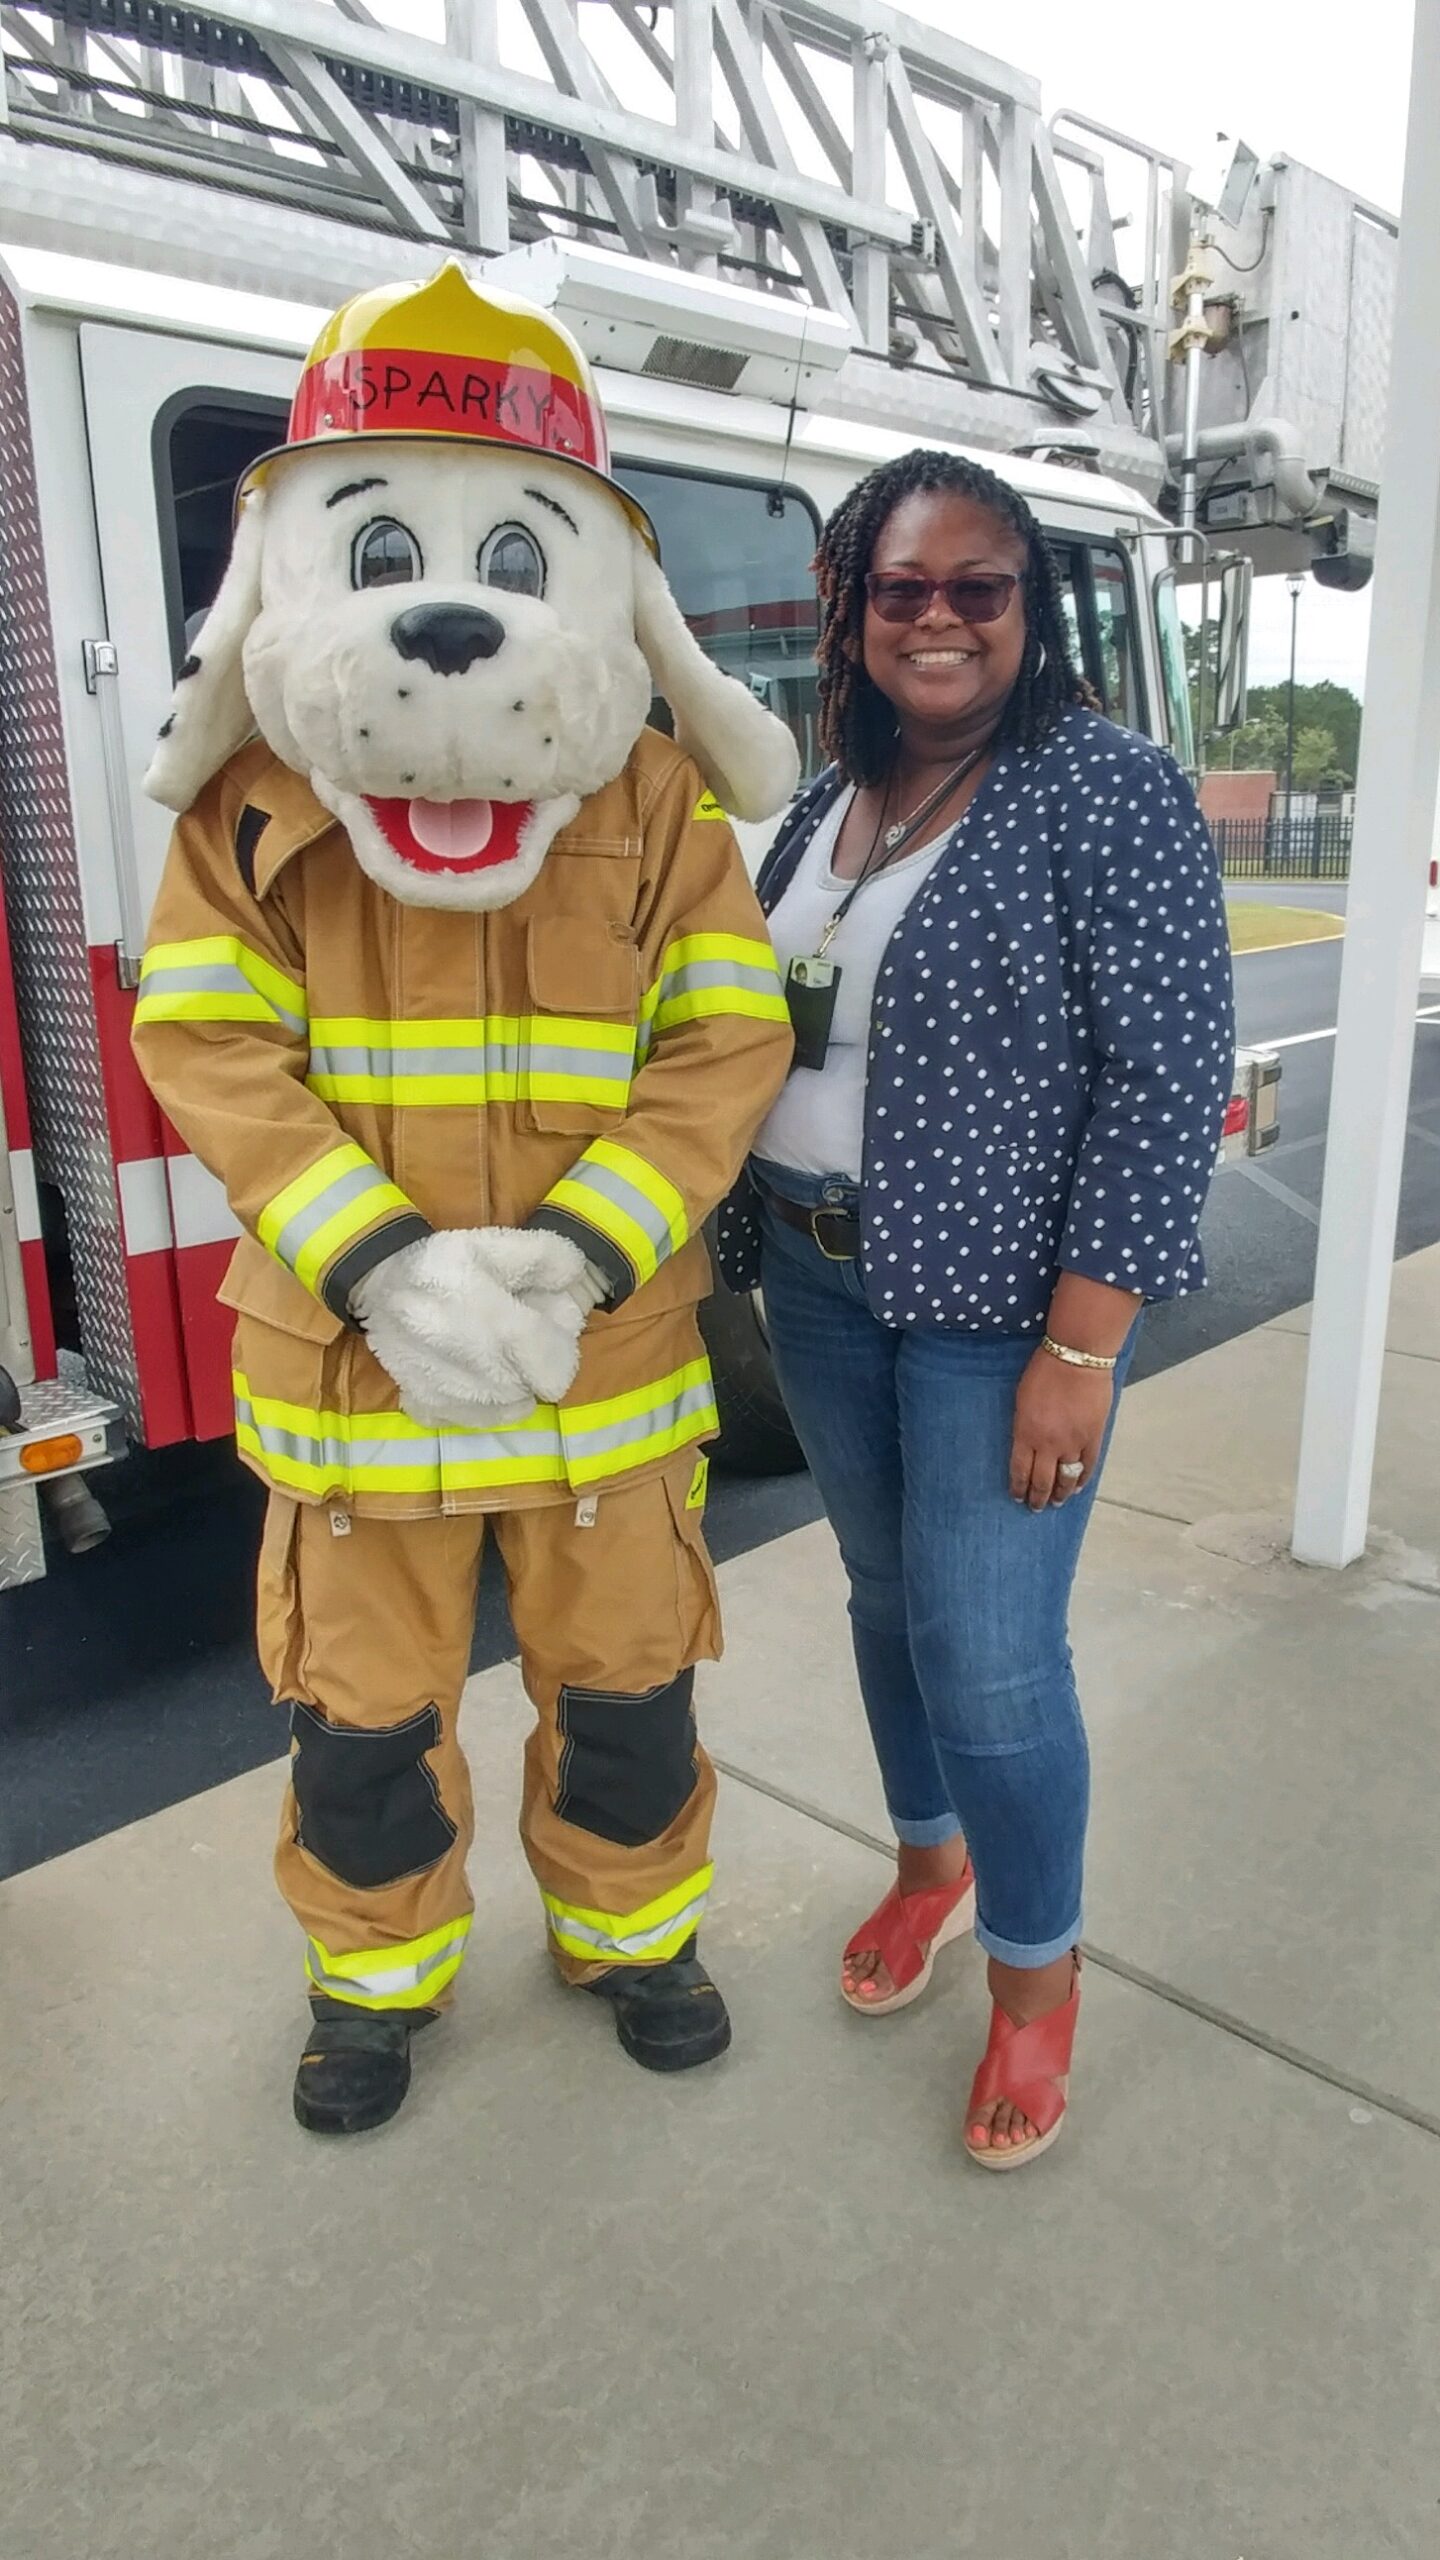 Dr. Gwen and Sparky the Fire Dog